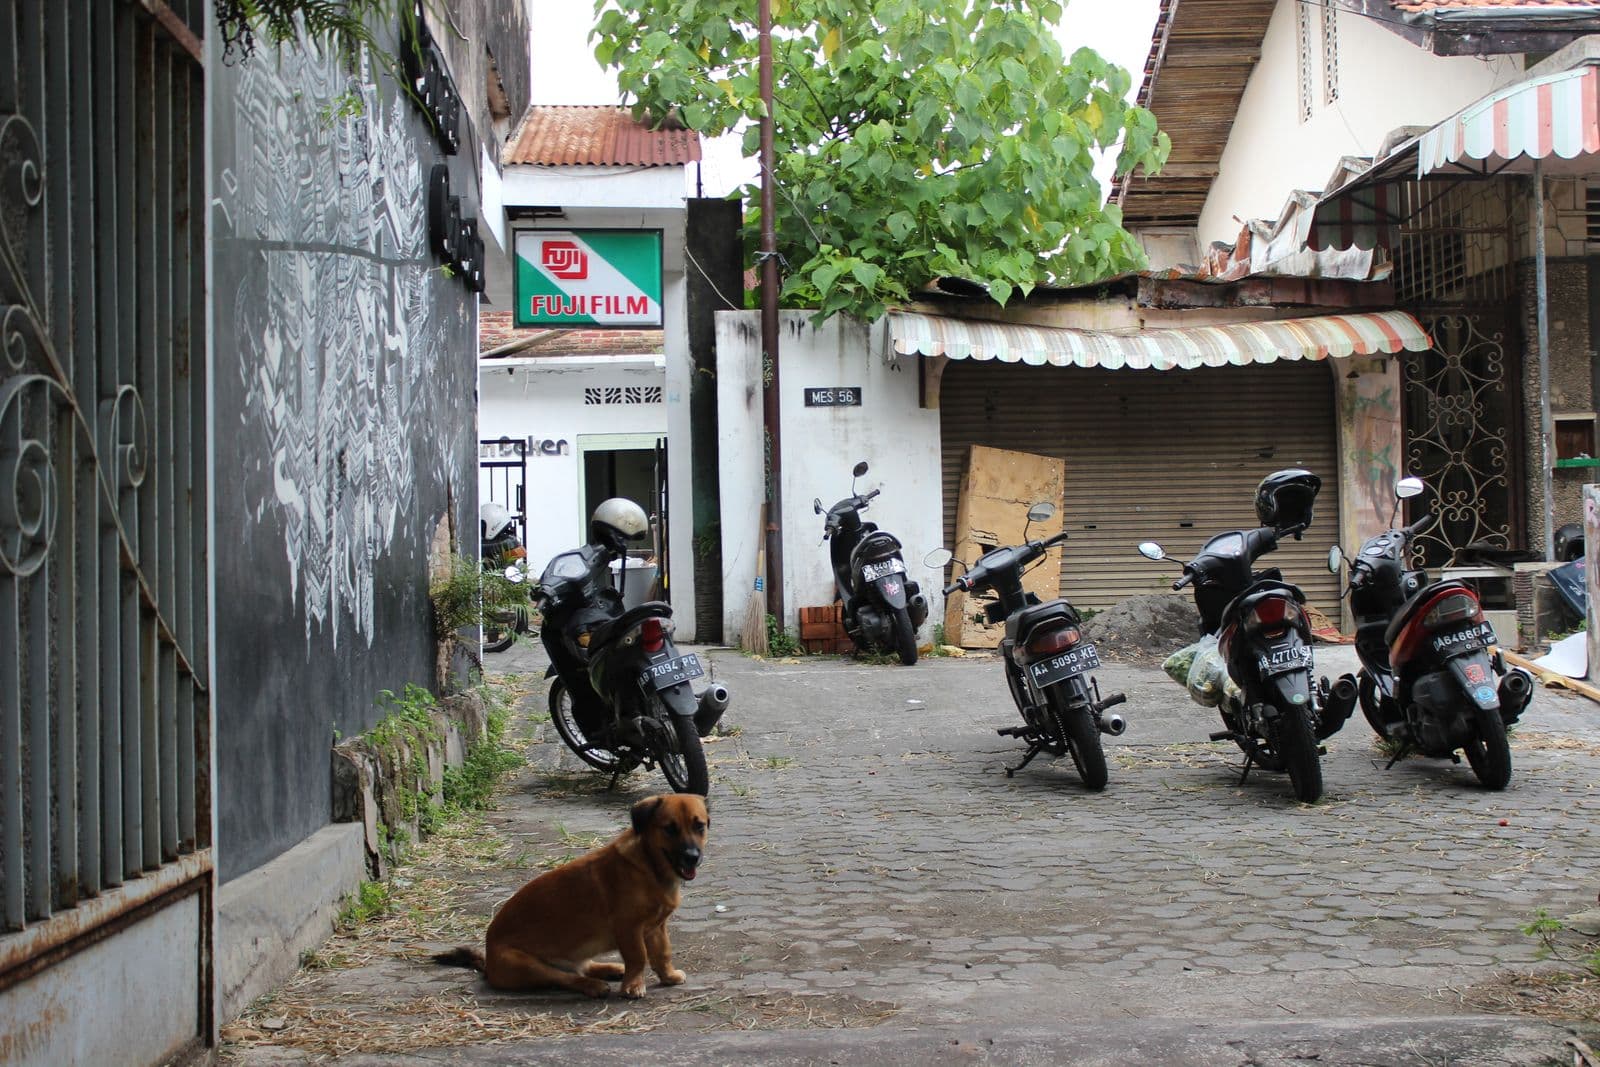 A street with parked motorcycles and a dog